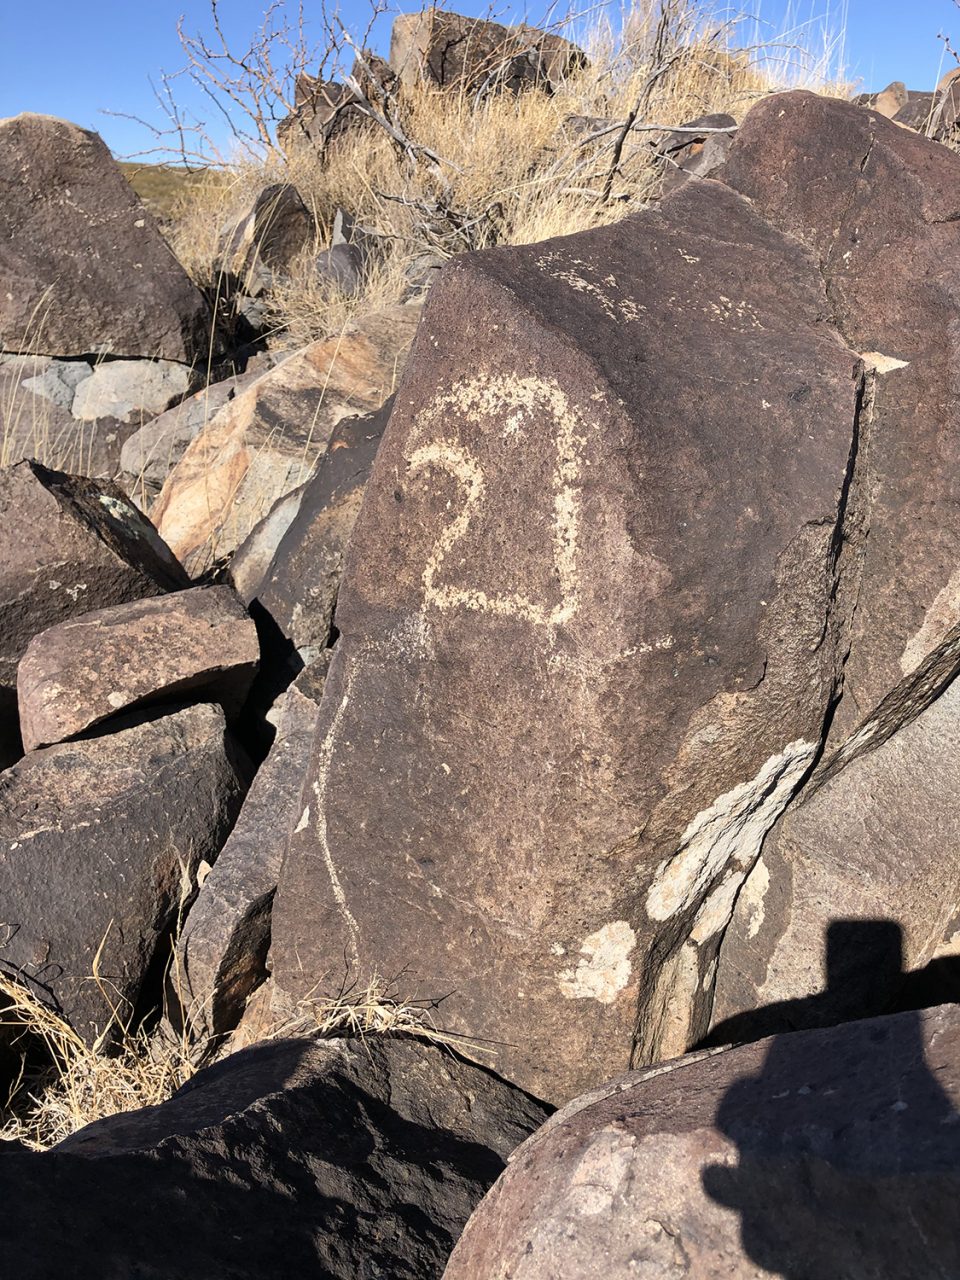 Carving of a bald eagle at Three Rivers Petroglyph Site in New Mexico. Photograph by Keith Dotson. Copyright 2022.